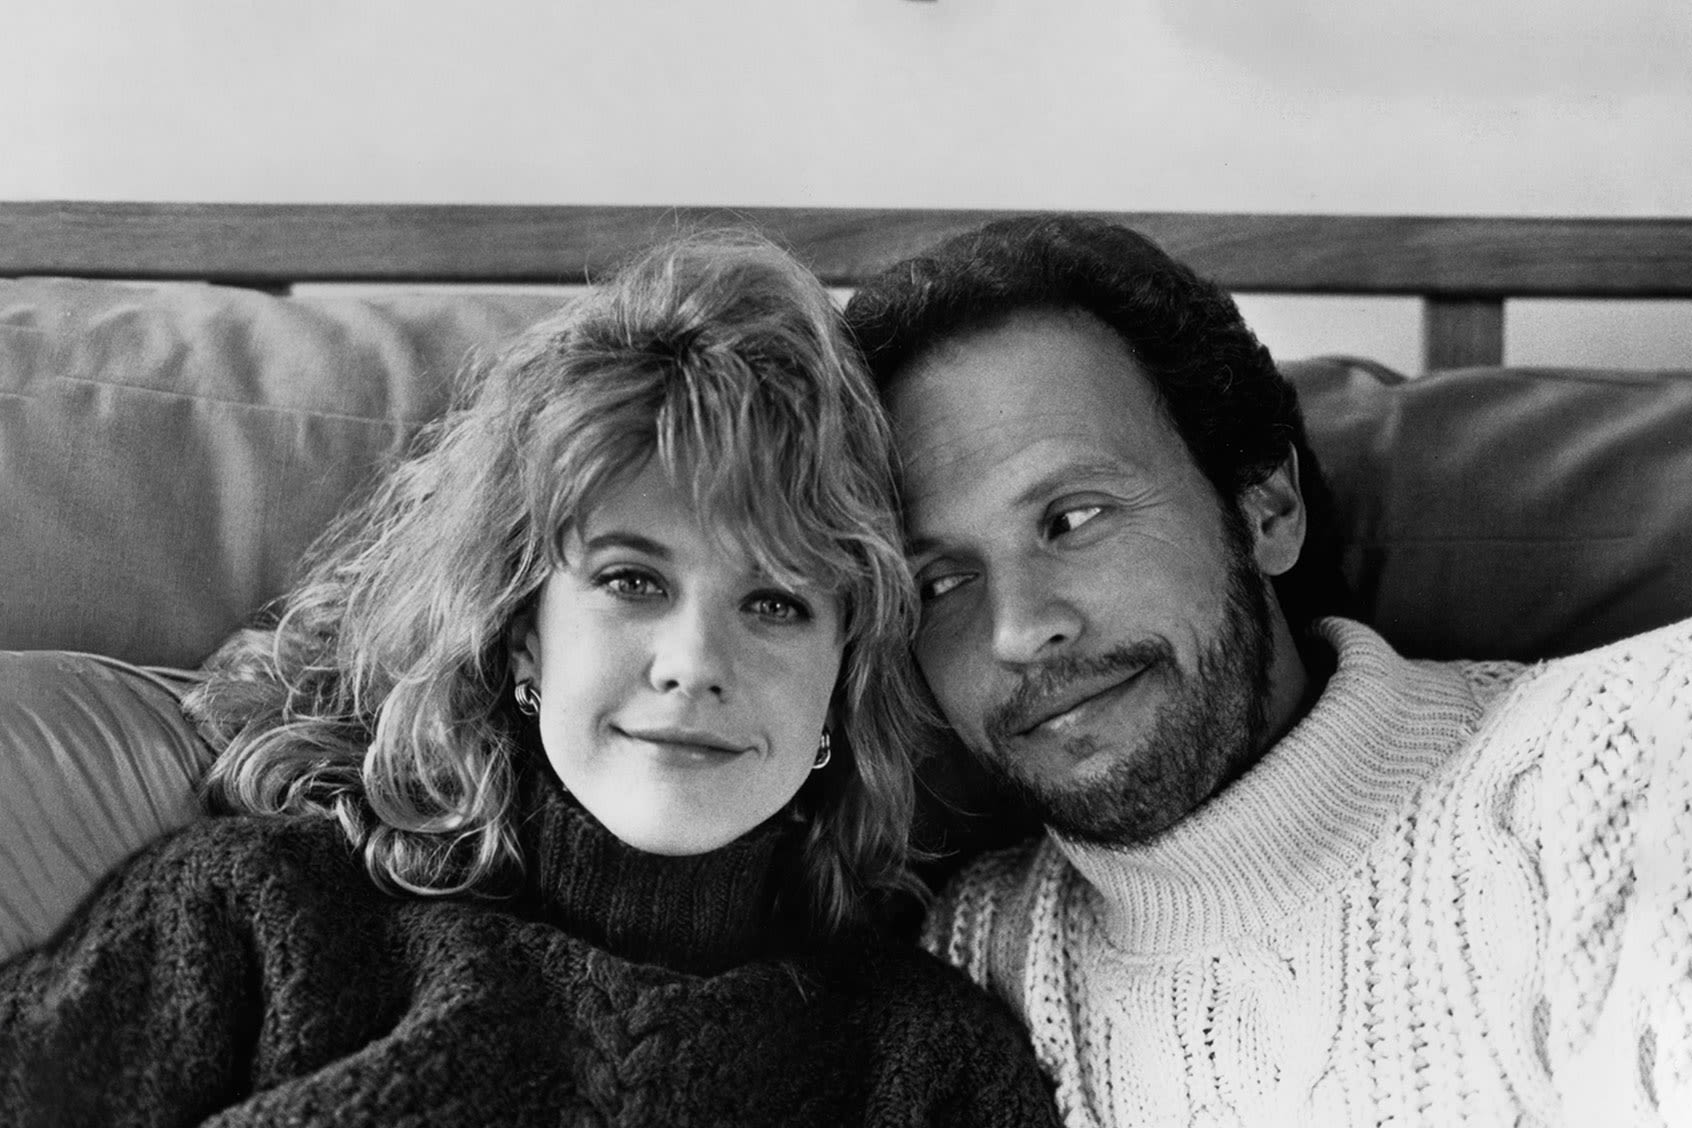 The questions "When Harry Met Sally" makes us to consider today